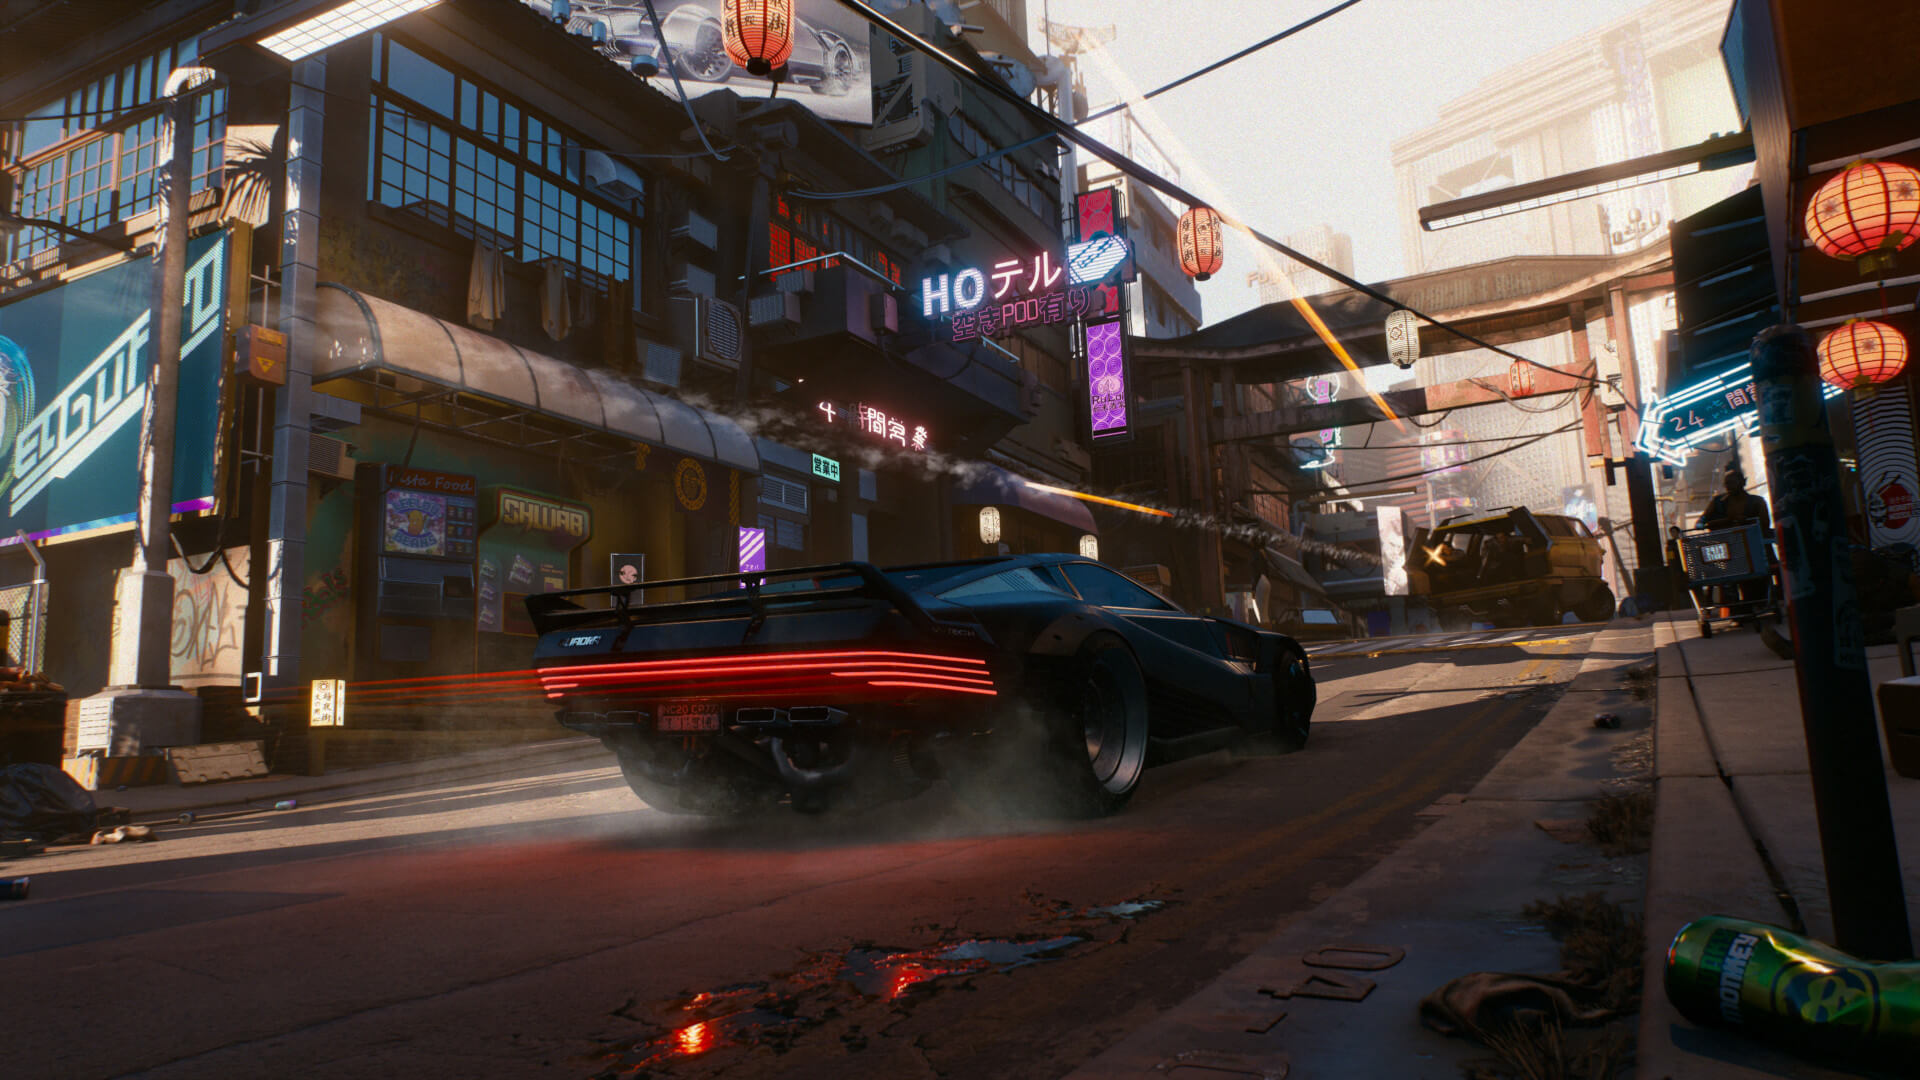 Cyberpunk 2077, developed by CD Projekt Red, which was also the victim of a data breach this year